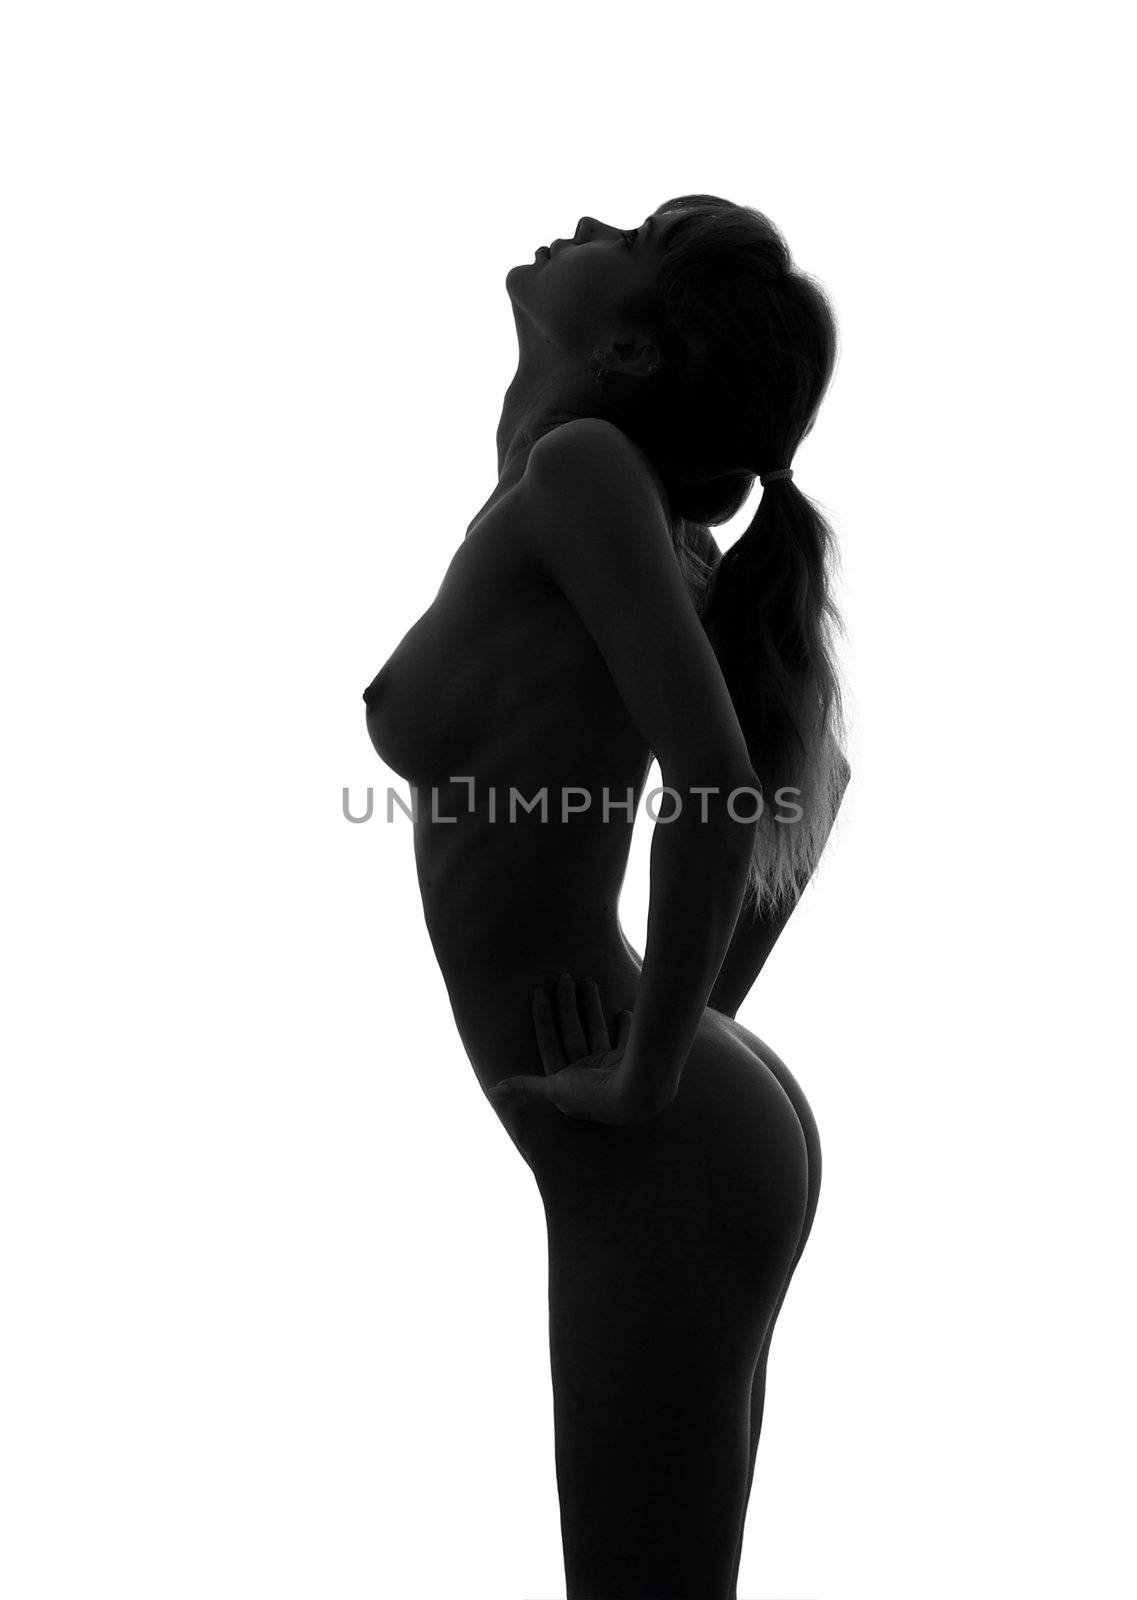 ponytail girl black and white silhouette